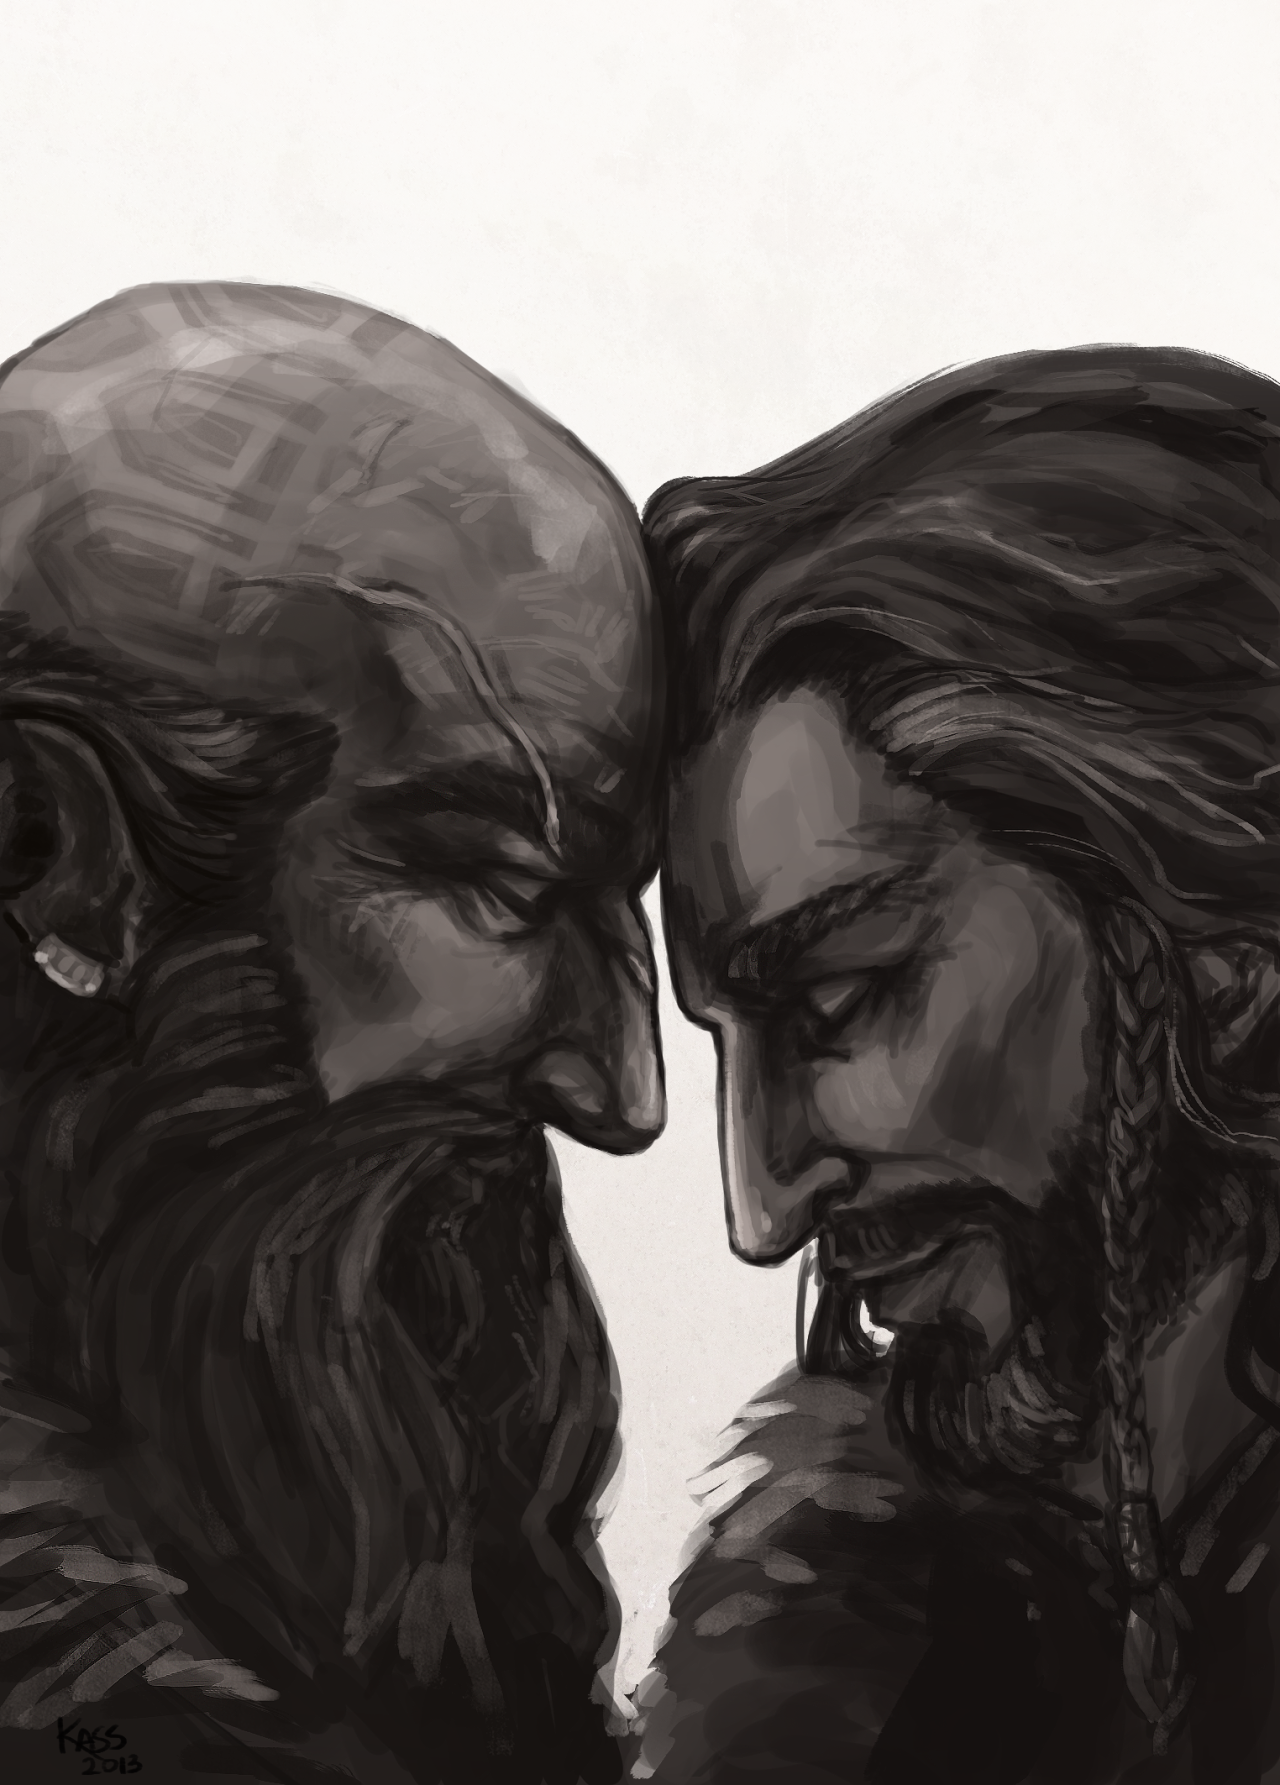 kassasaurus-rex:
“weeps over thorin and dwalin and their friendship ;;;; big strong loyal crazy stubborn dwarf bros weh
”